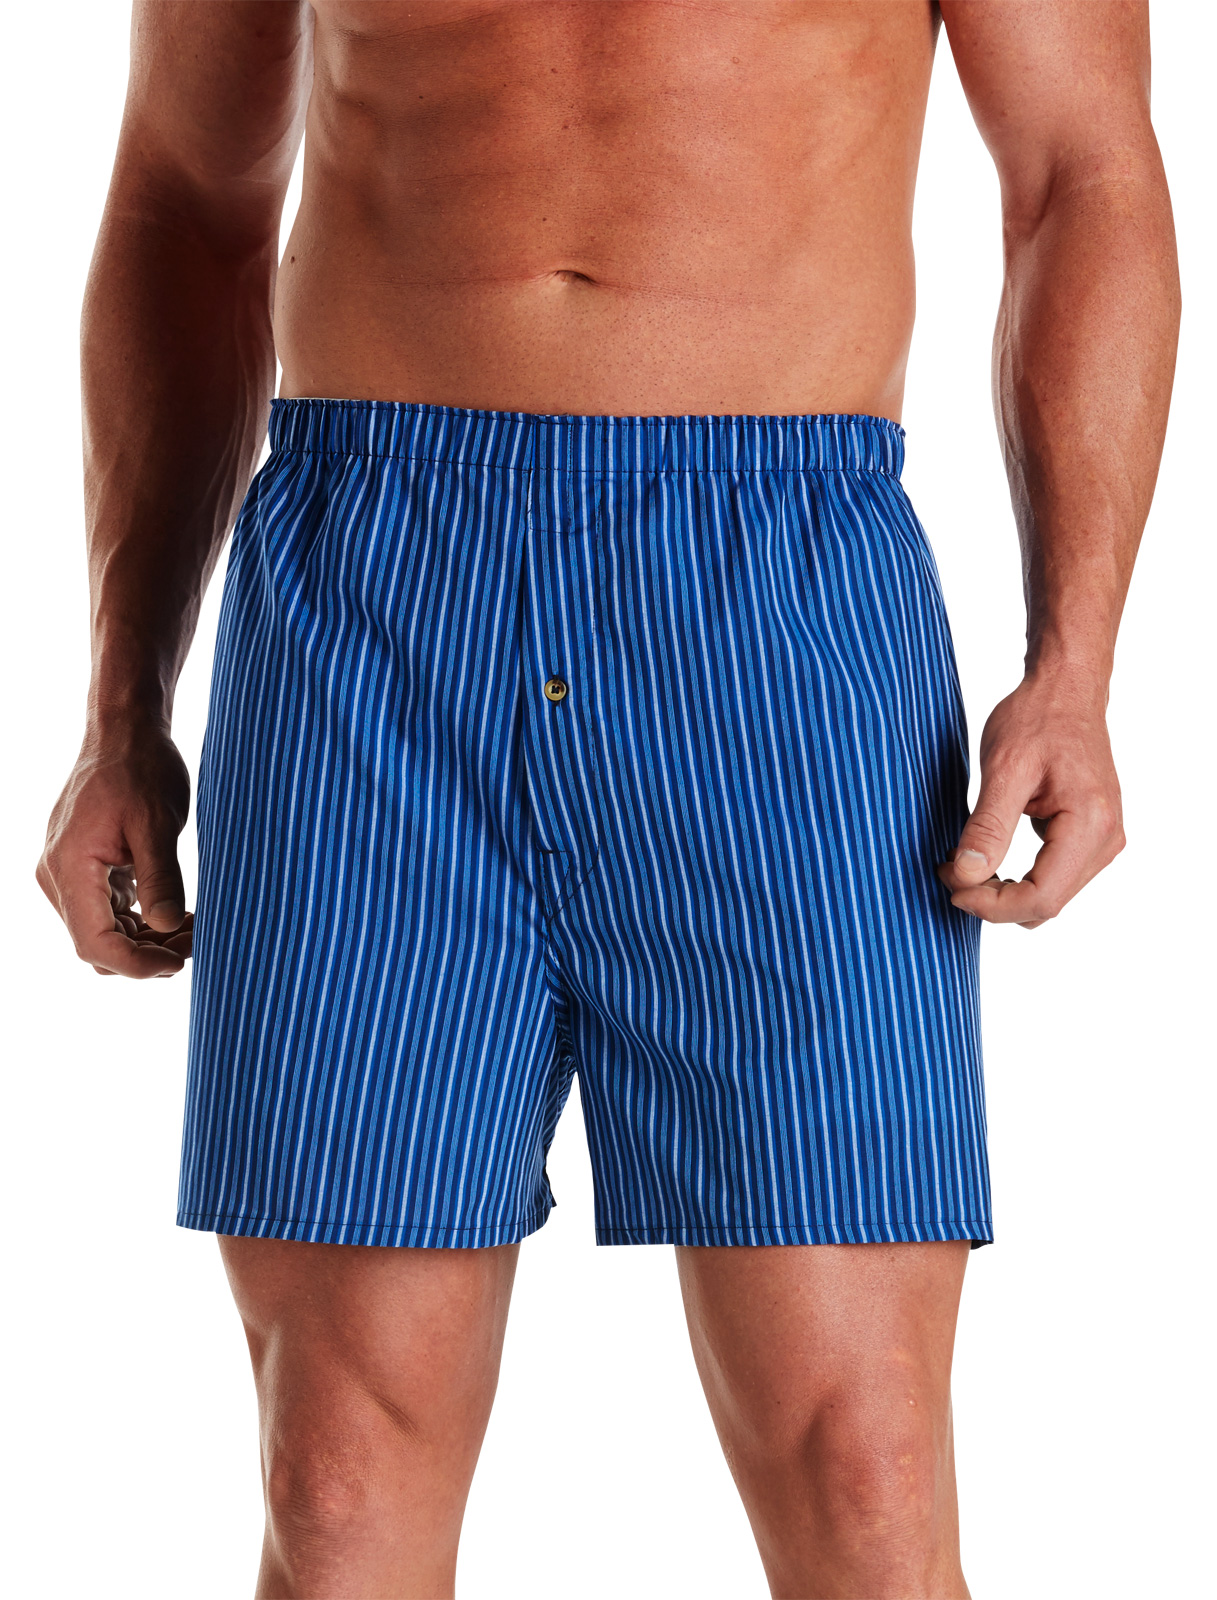 Harbor Bay Mens' Big and Tall 3-pk Stripe Woven Boxers